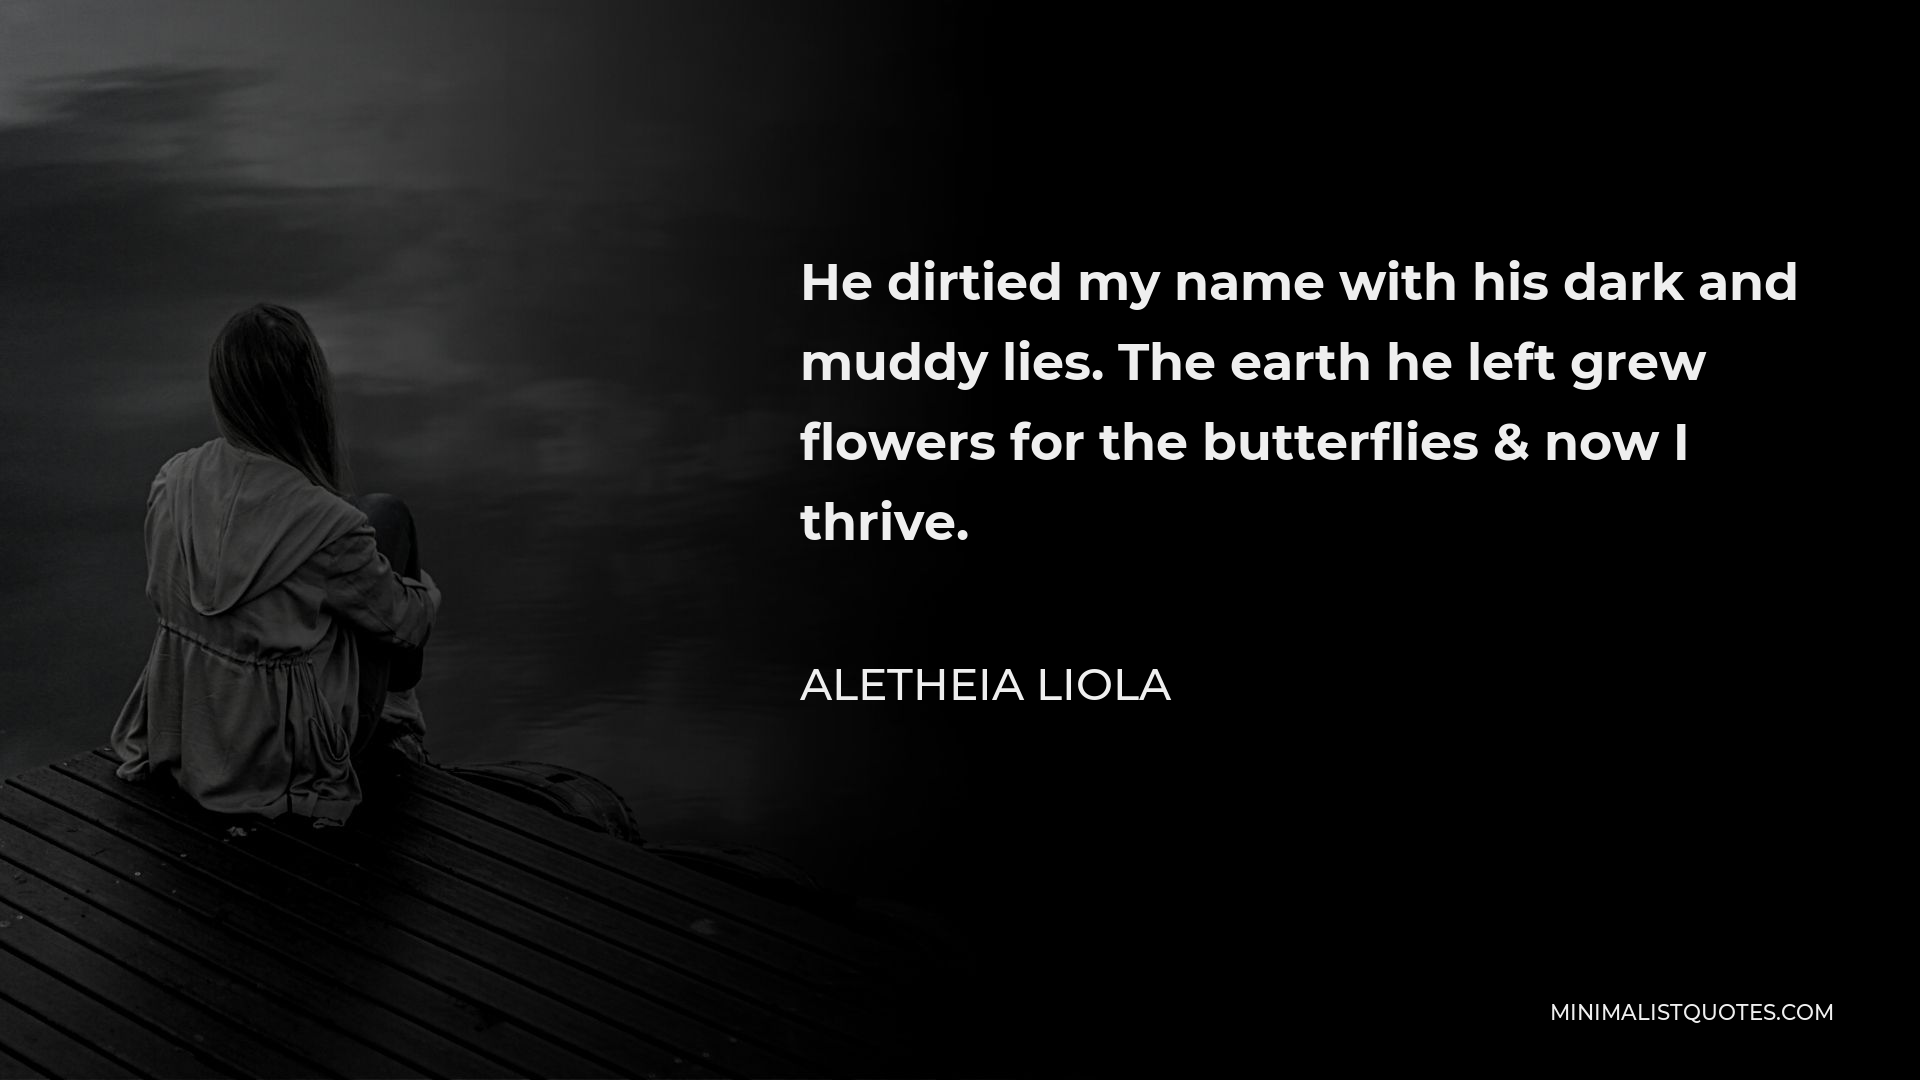 Aletheia Liola Quote - He dirtied my name with his dark and muddy lies. The earth he left grew flowers for the butterflies & now I thrive.